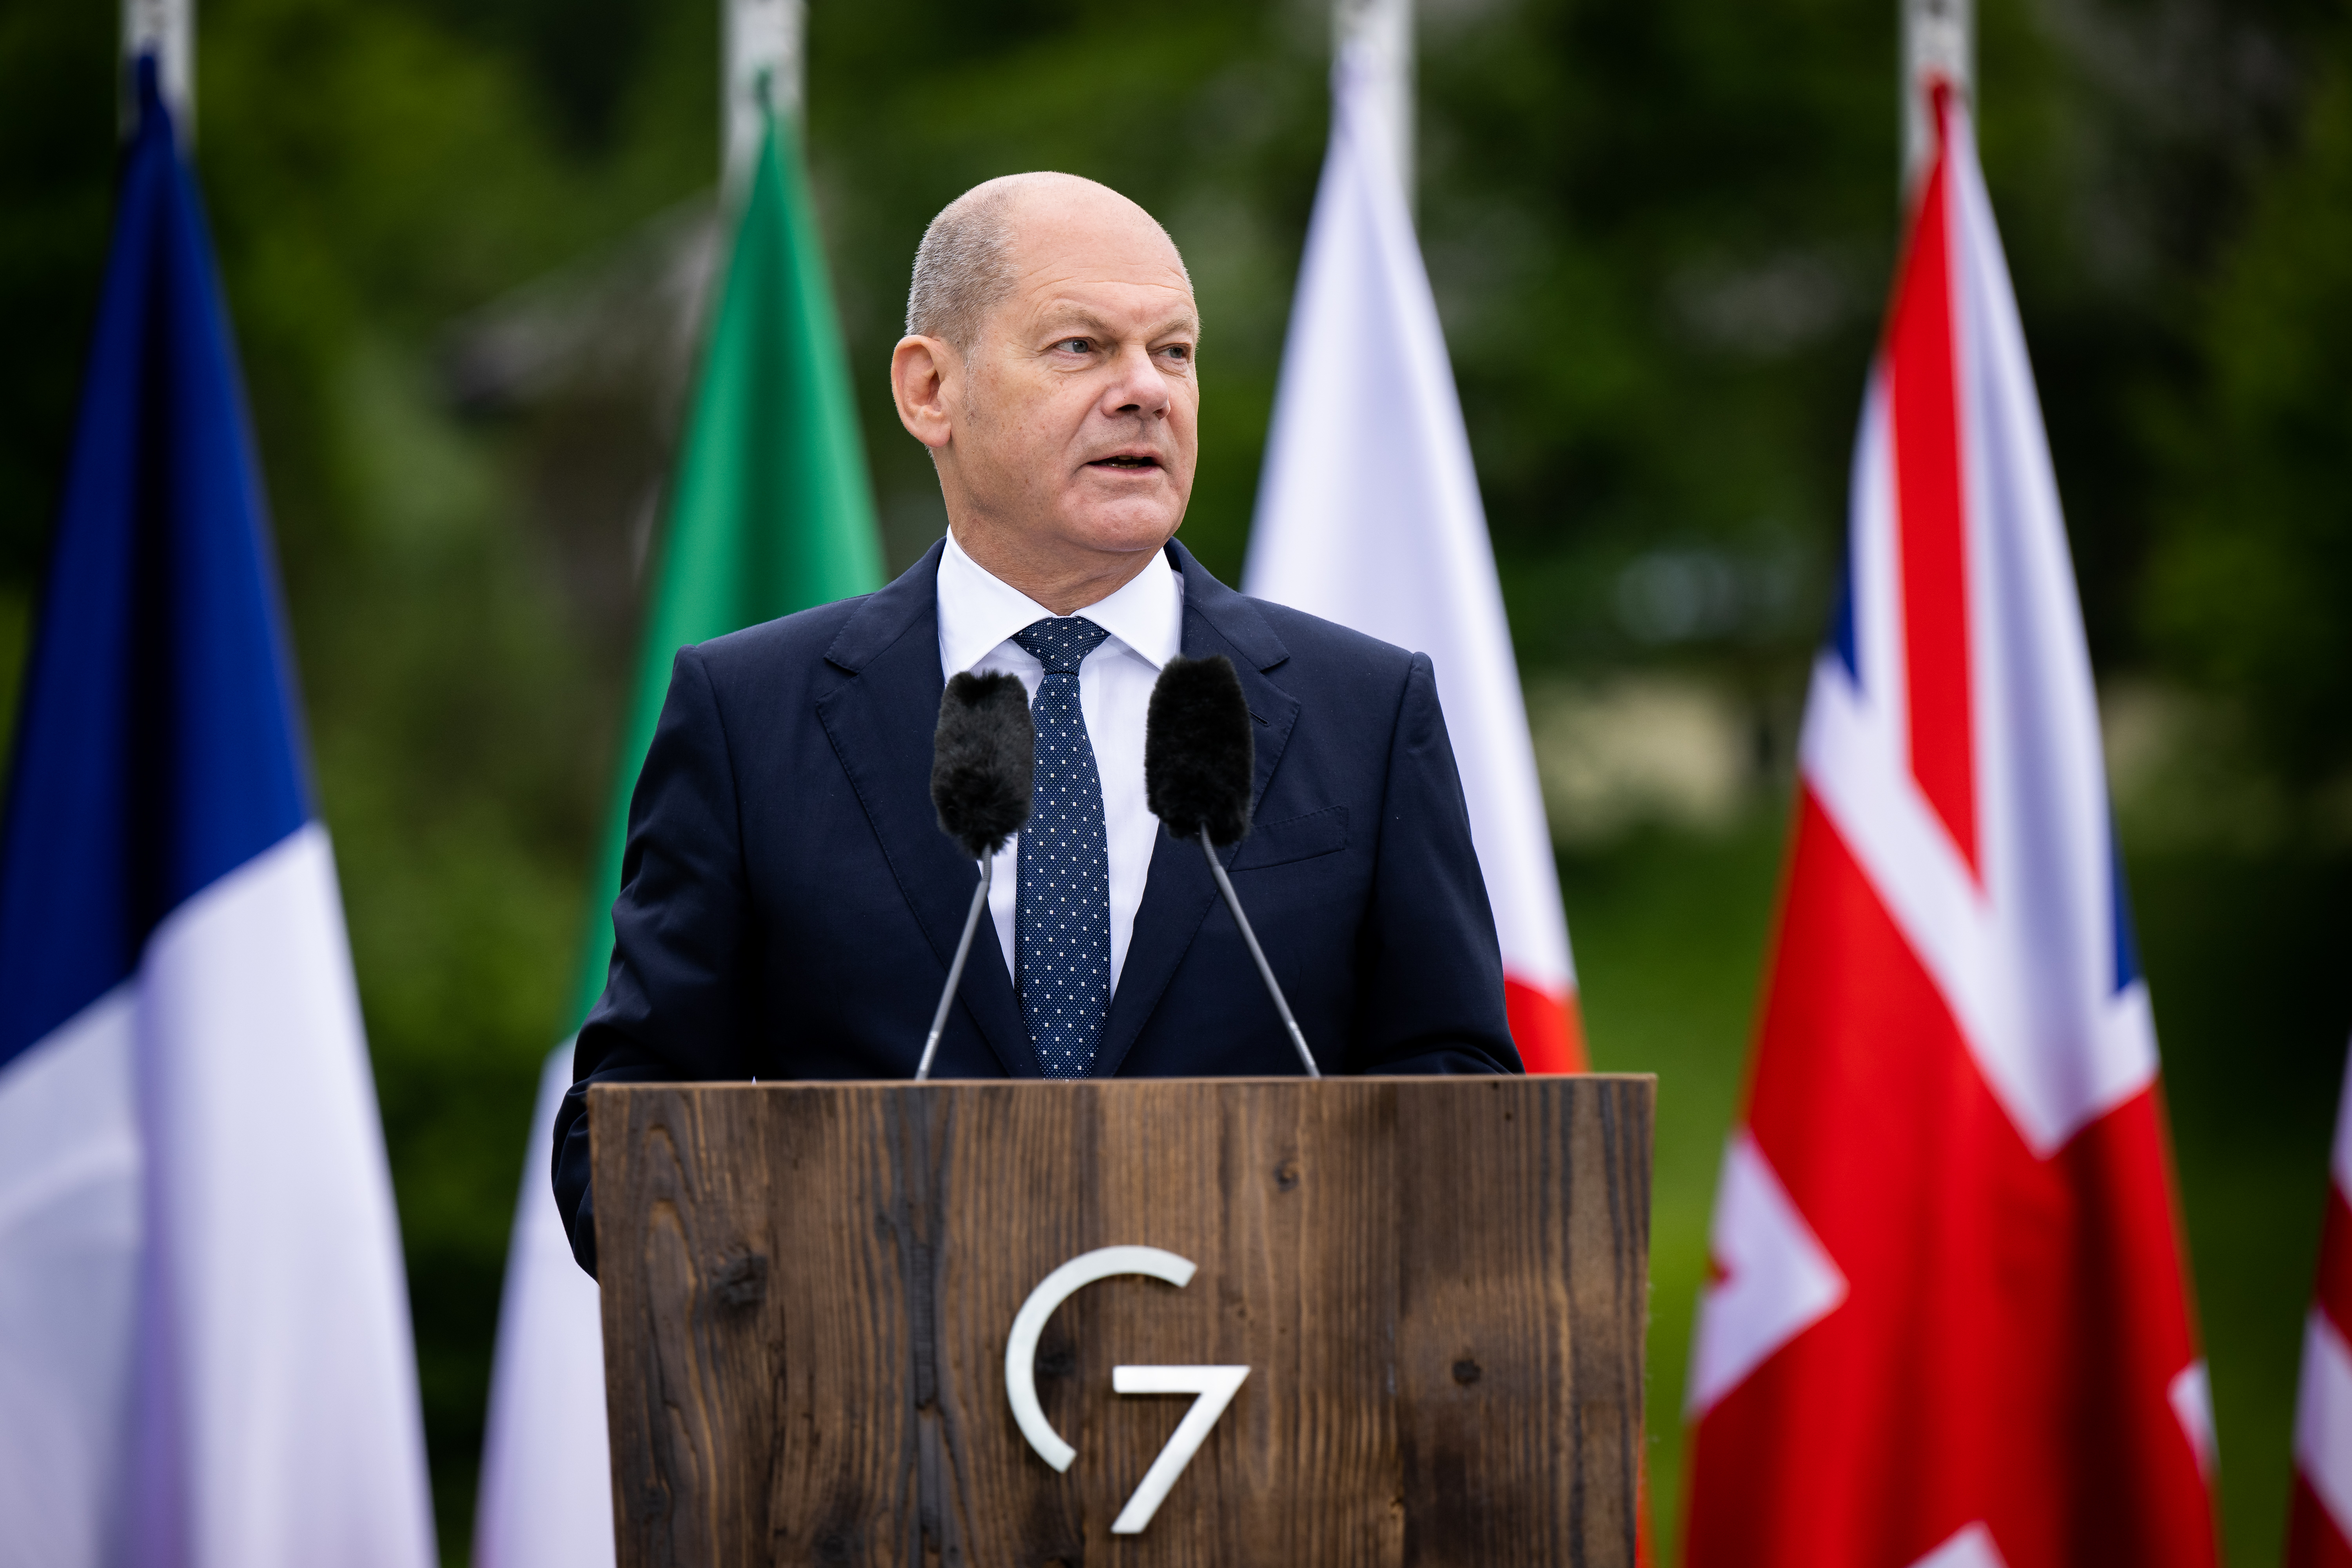 Federal Chancellor Olaf Scholz speaking to media representatives during his closing press conference at the G7 summit.